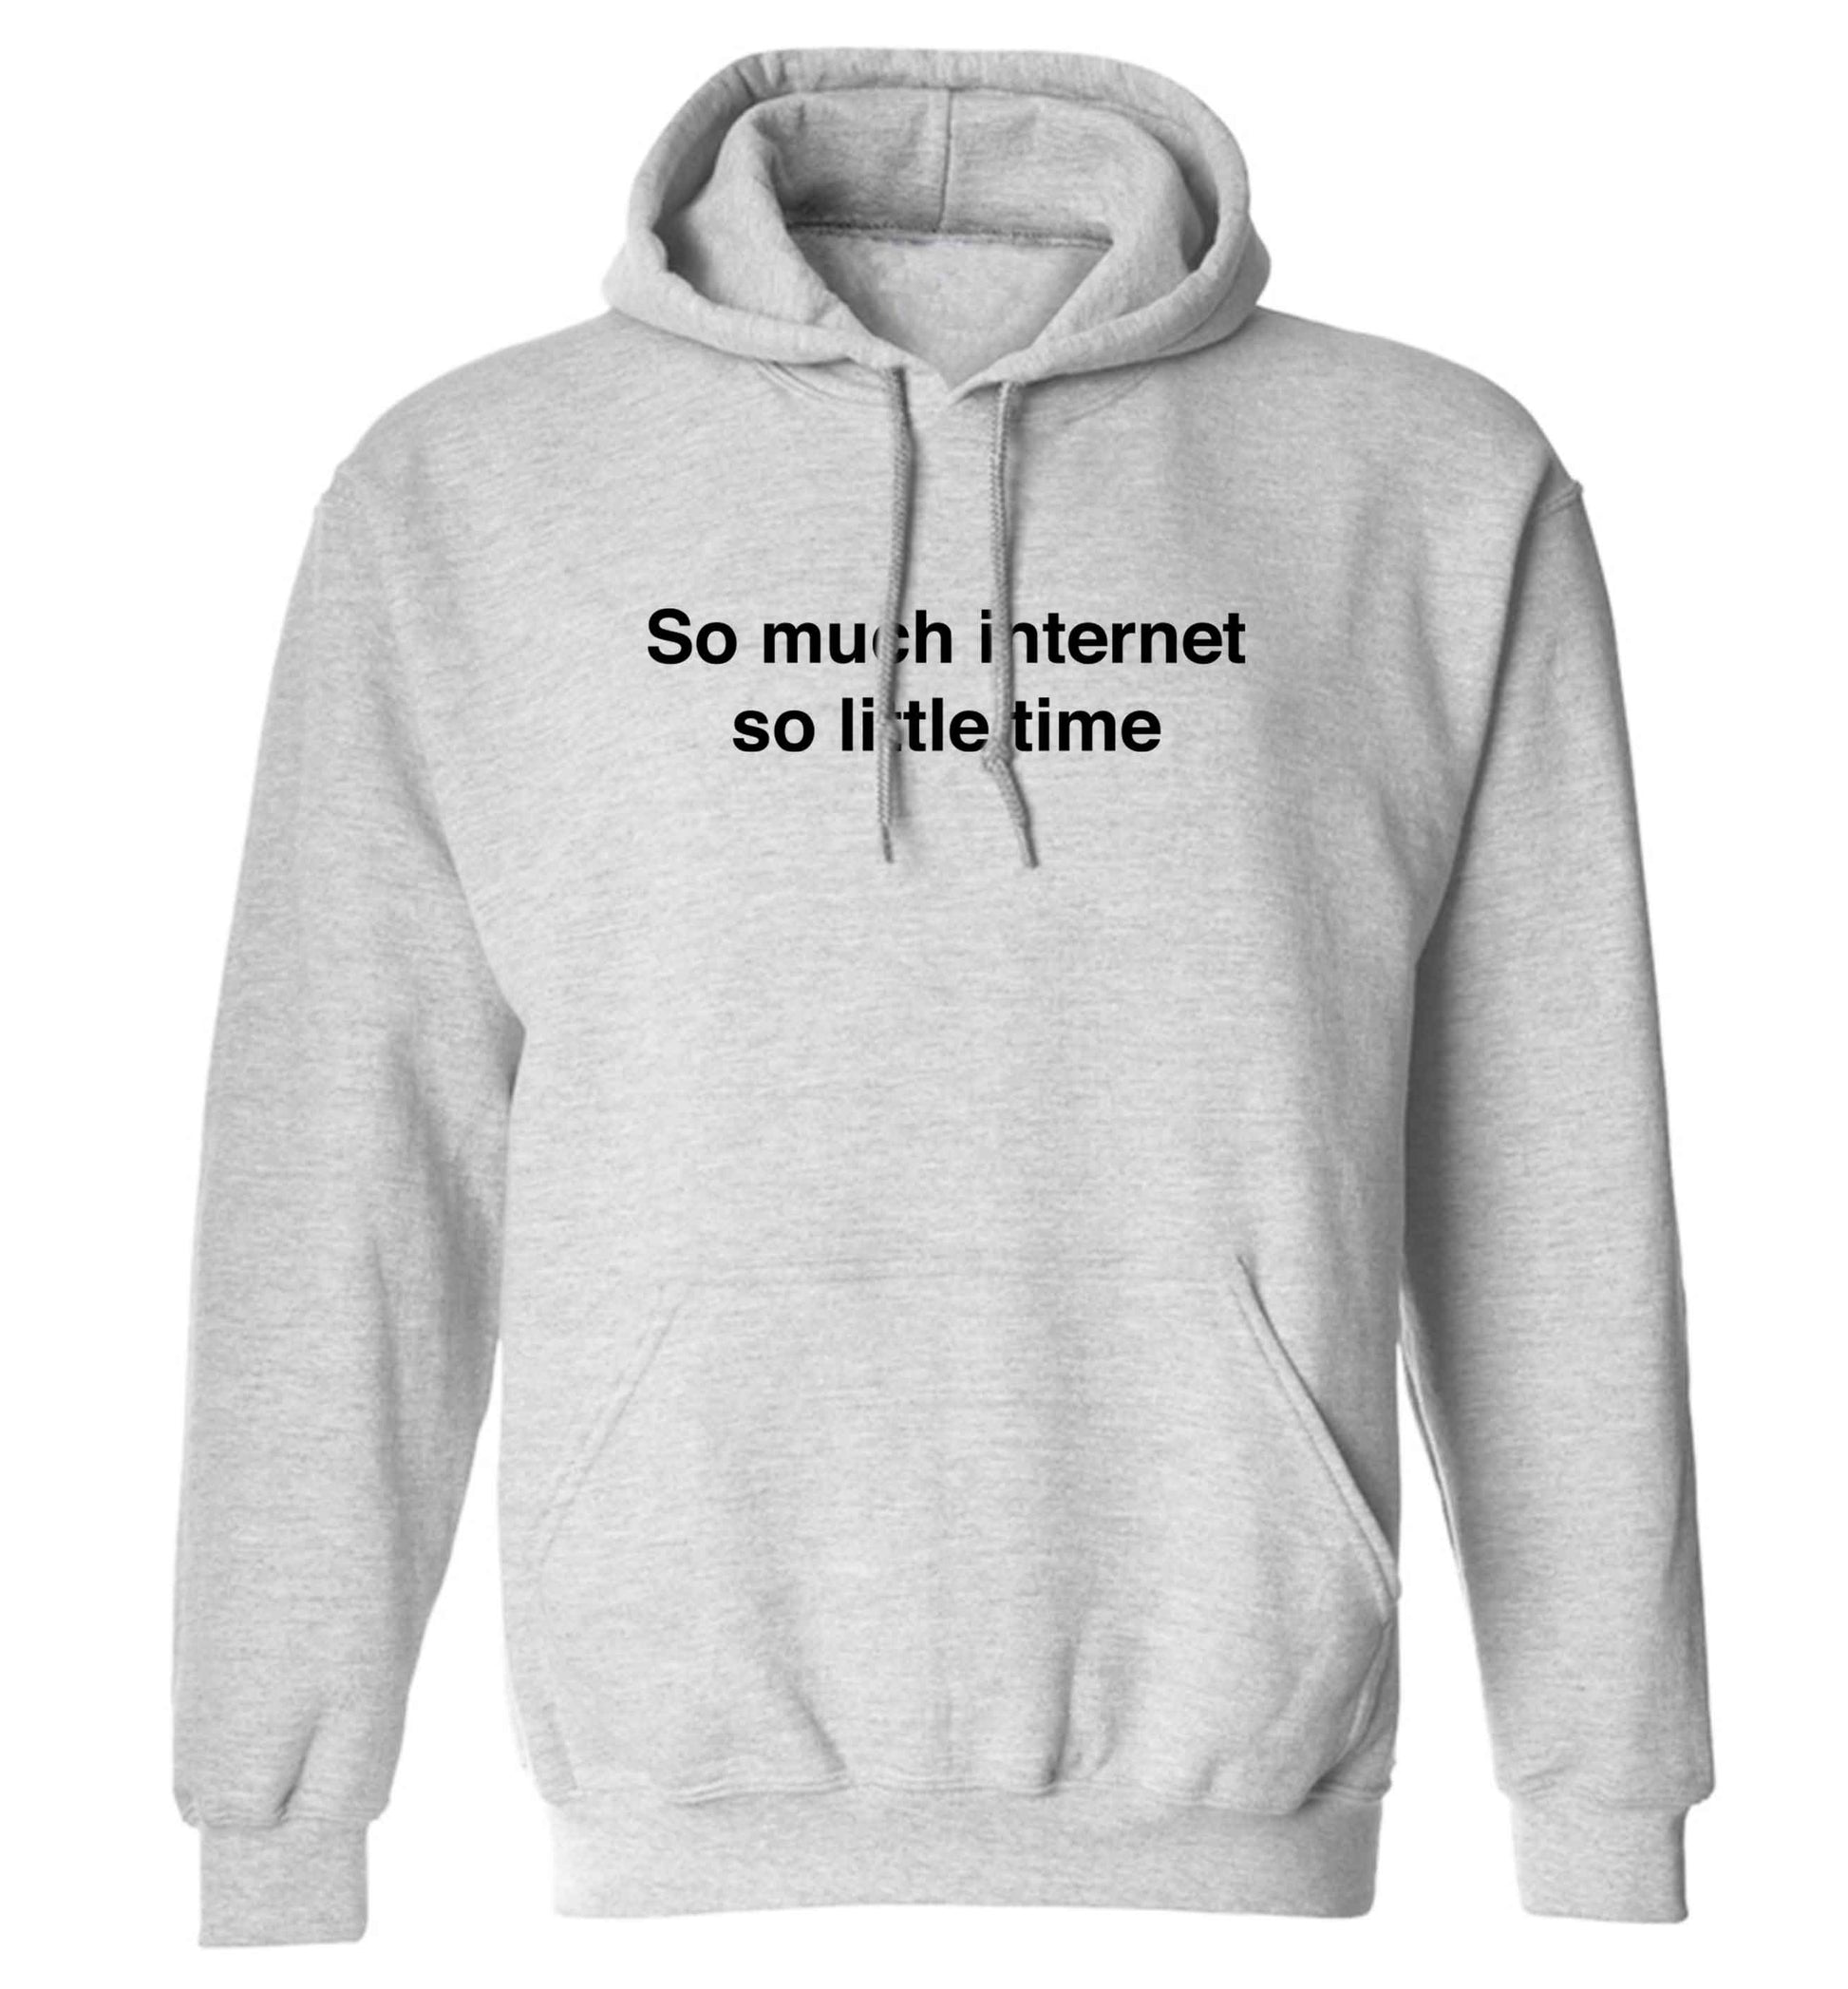 So much internet so little time adults unisex grey hoodie 2XL